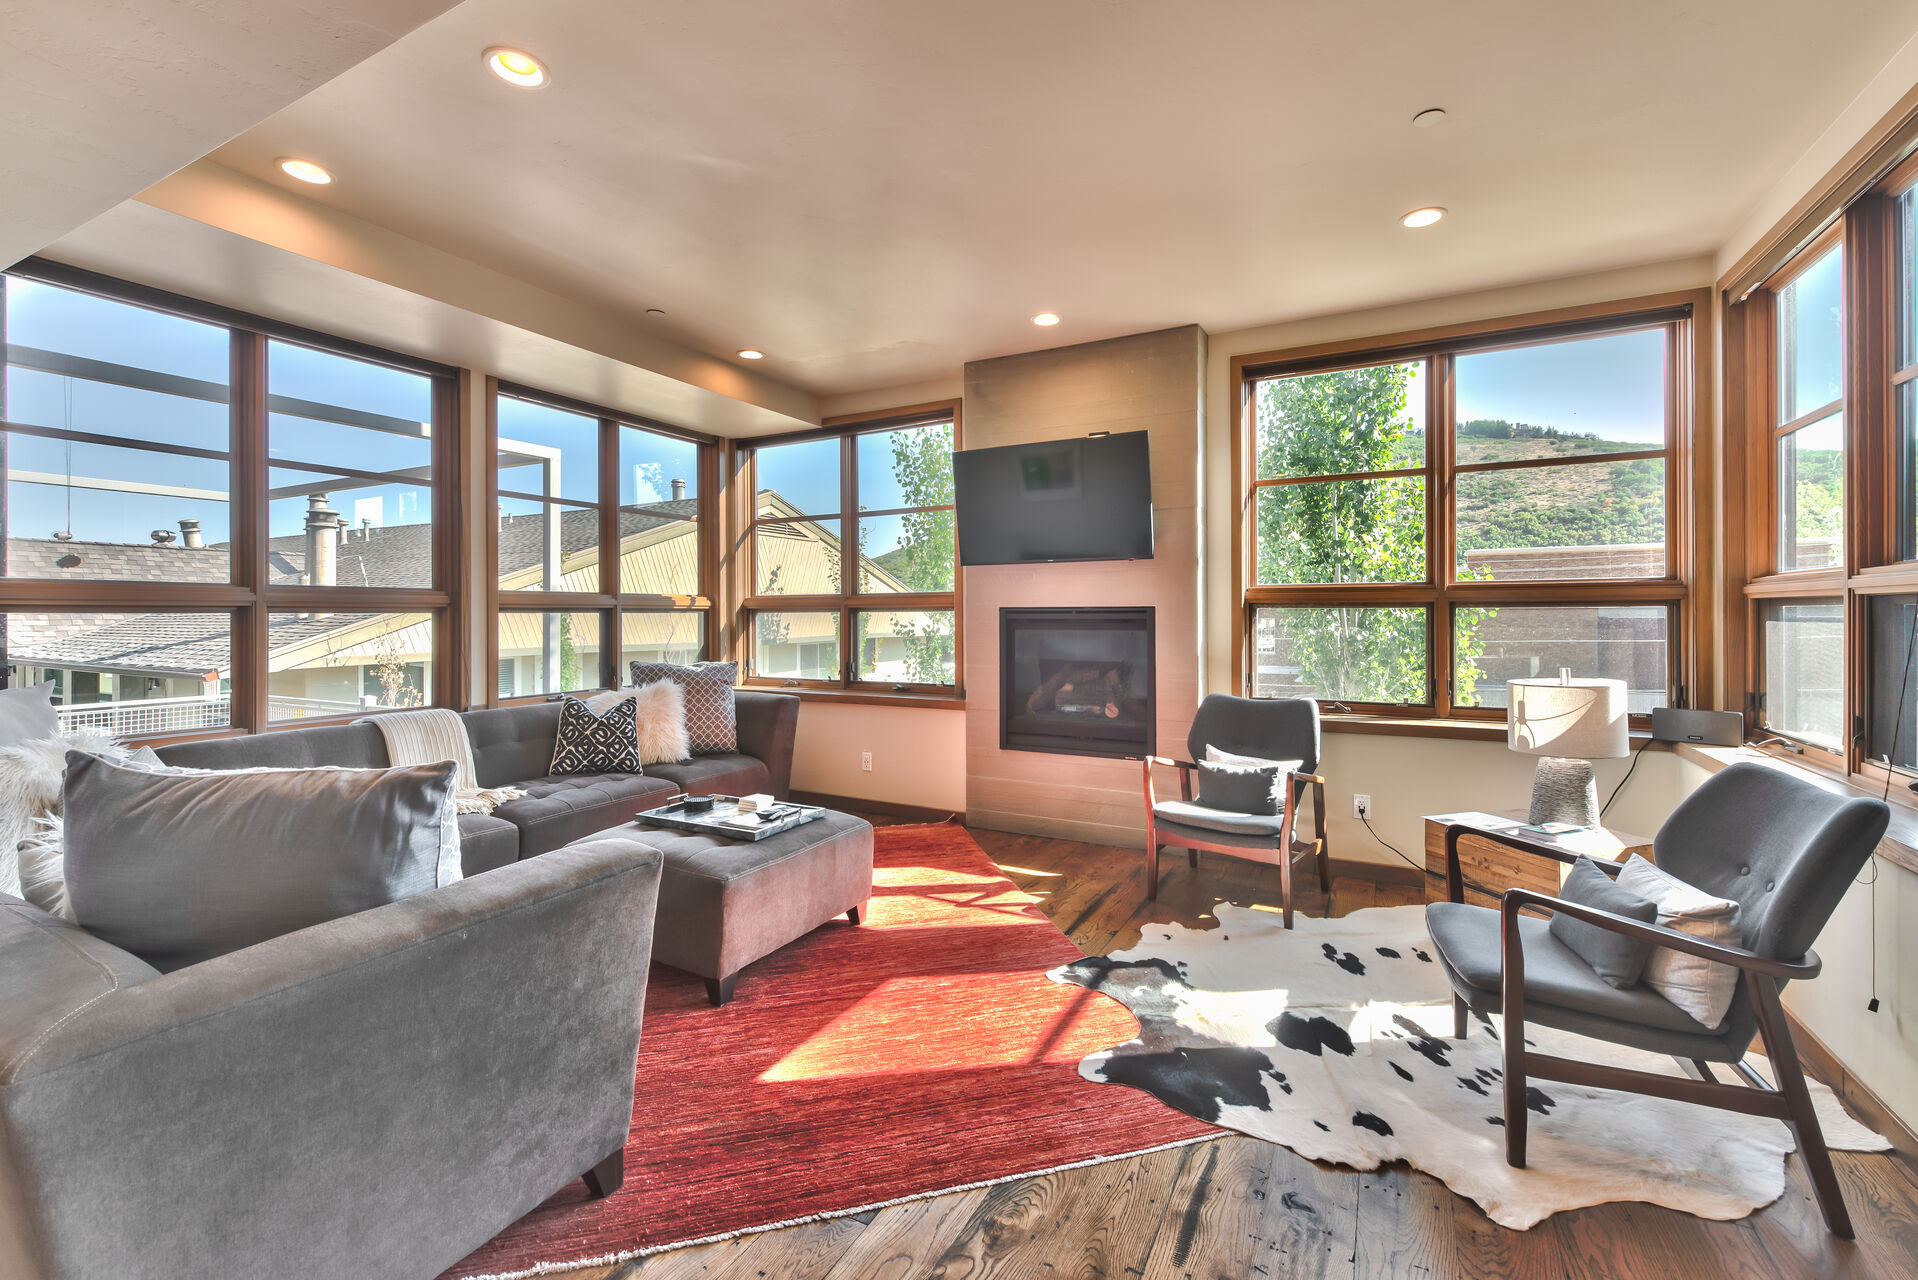 Living Room with Fireplace and Smart TV in Our Upper Deer Valley House Rentals.